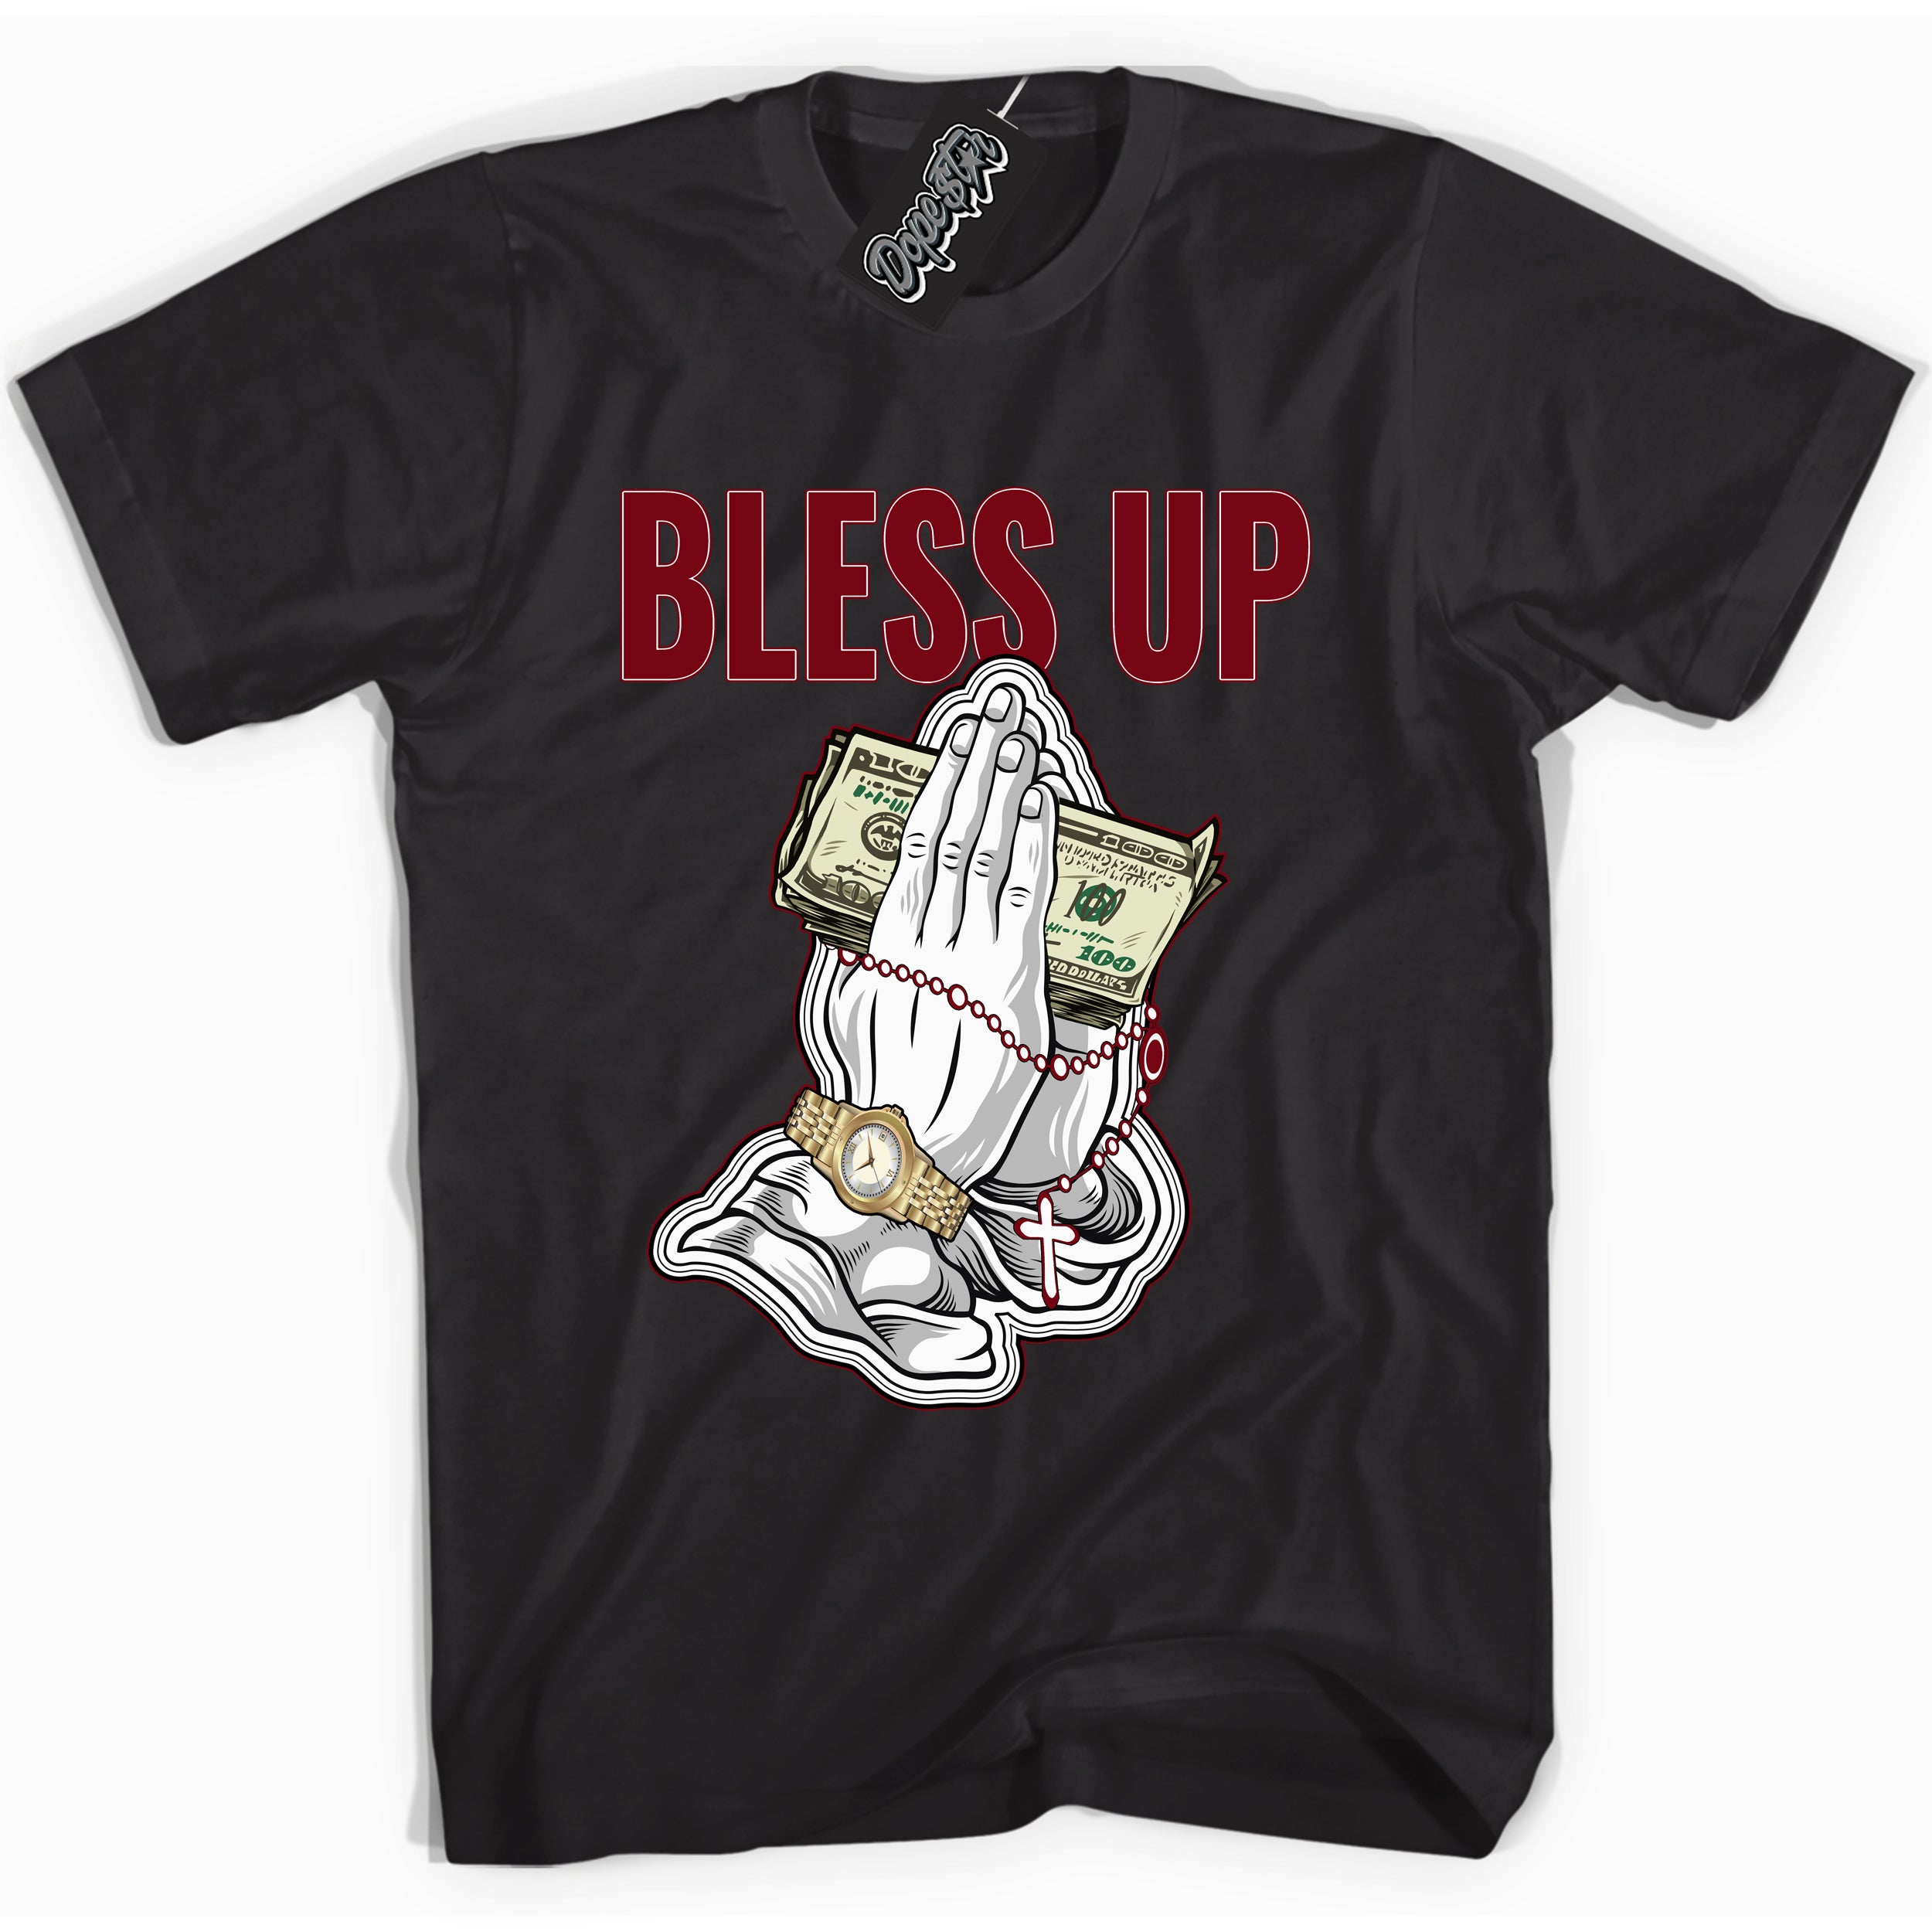 Cool Black graphic tee with “ Bless Up ” print, that perfectly matches OG Metallic Burgundy 1s sneakers 